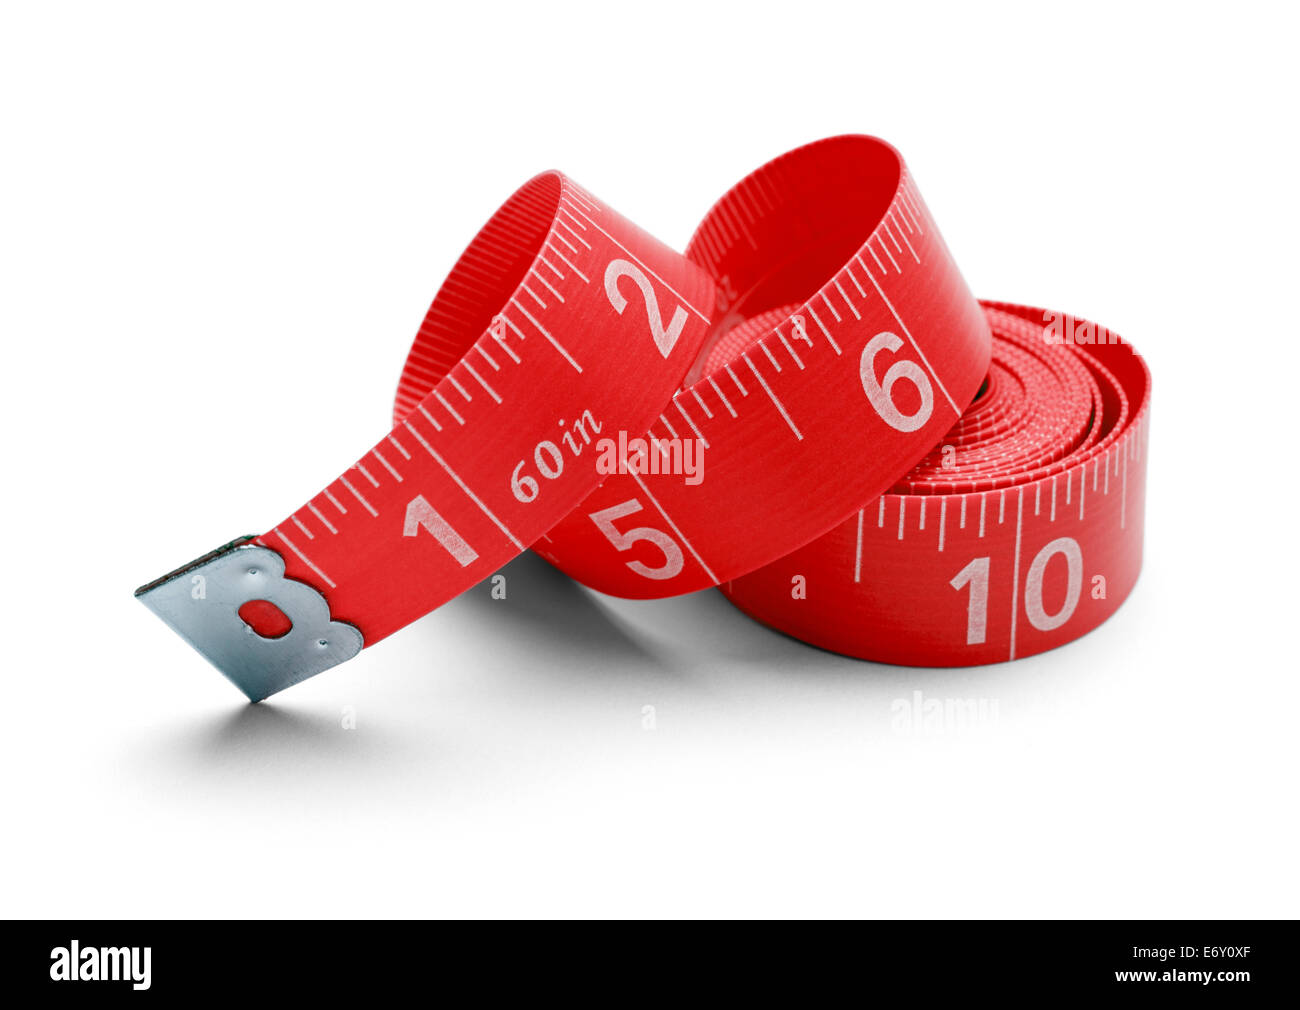 Rolled up and twisted sewing tape measure Isolated on white background. Stock Photo